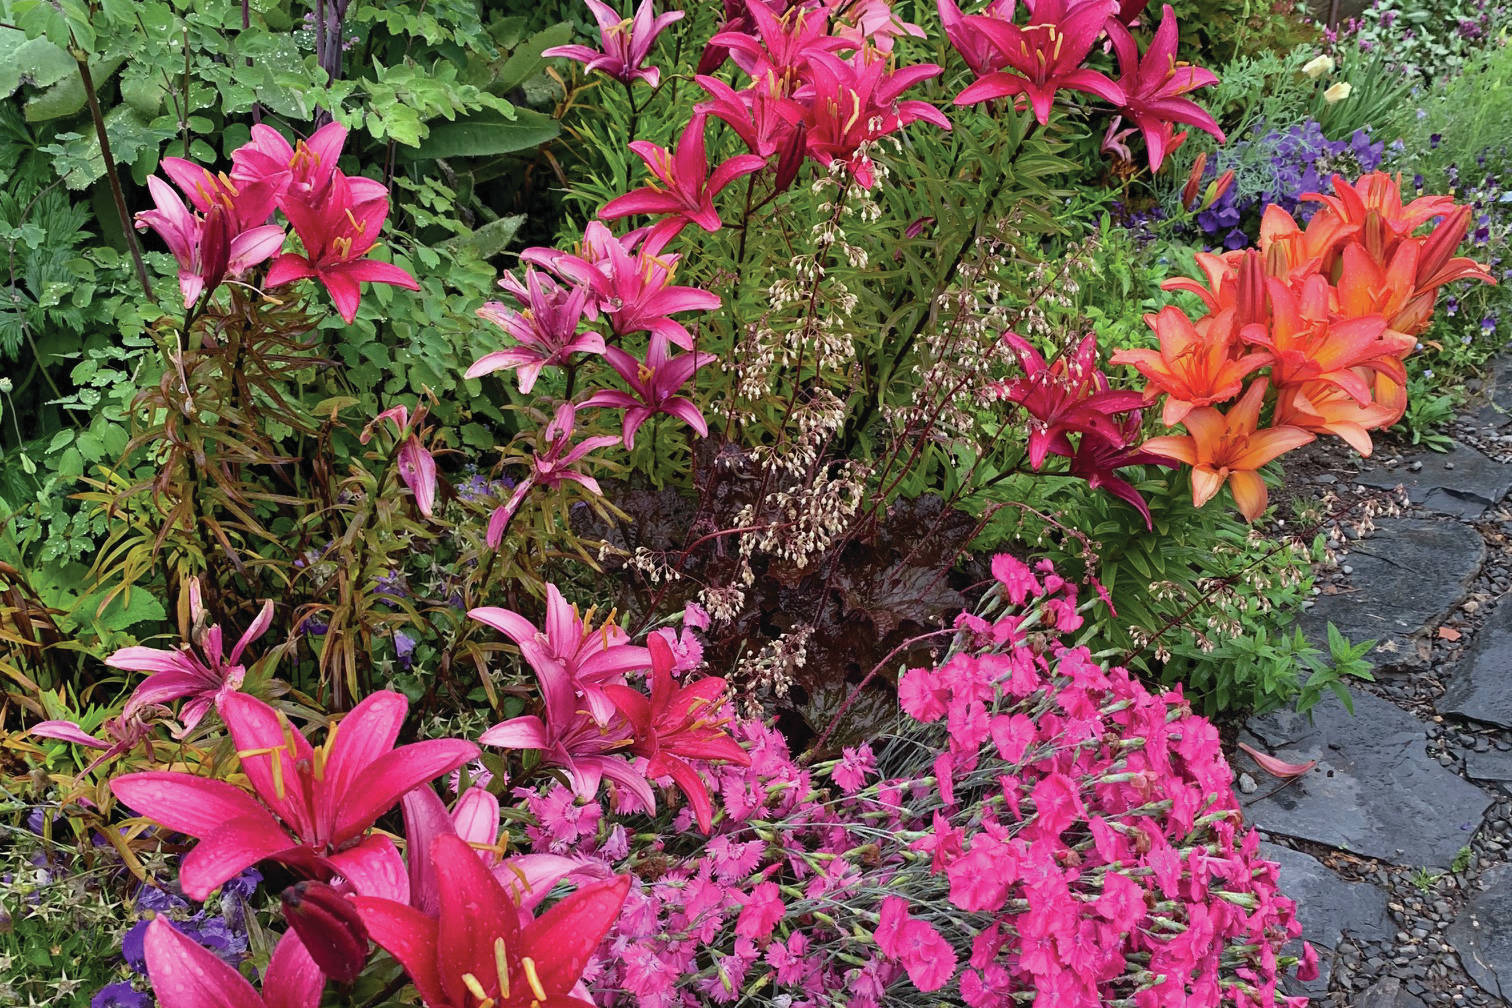 Cottage pinks, asiatic lilies, heuchera, thalictrum, all happily cohabitate in a very unplanned perennial bed at the Kachemak Gardener’s garden in this photo taken on July 28, 2019, in Homer, Alaska. (Photo by Rosemary Fitzpatrick)